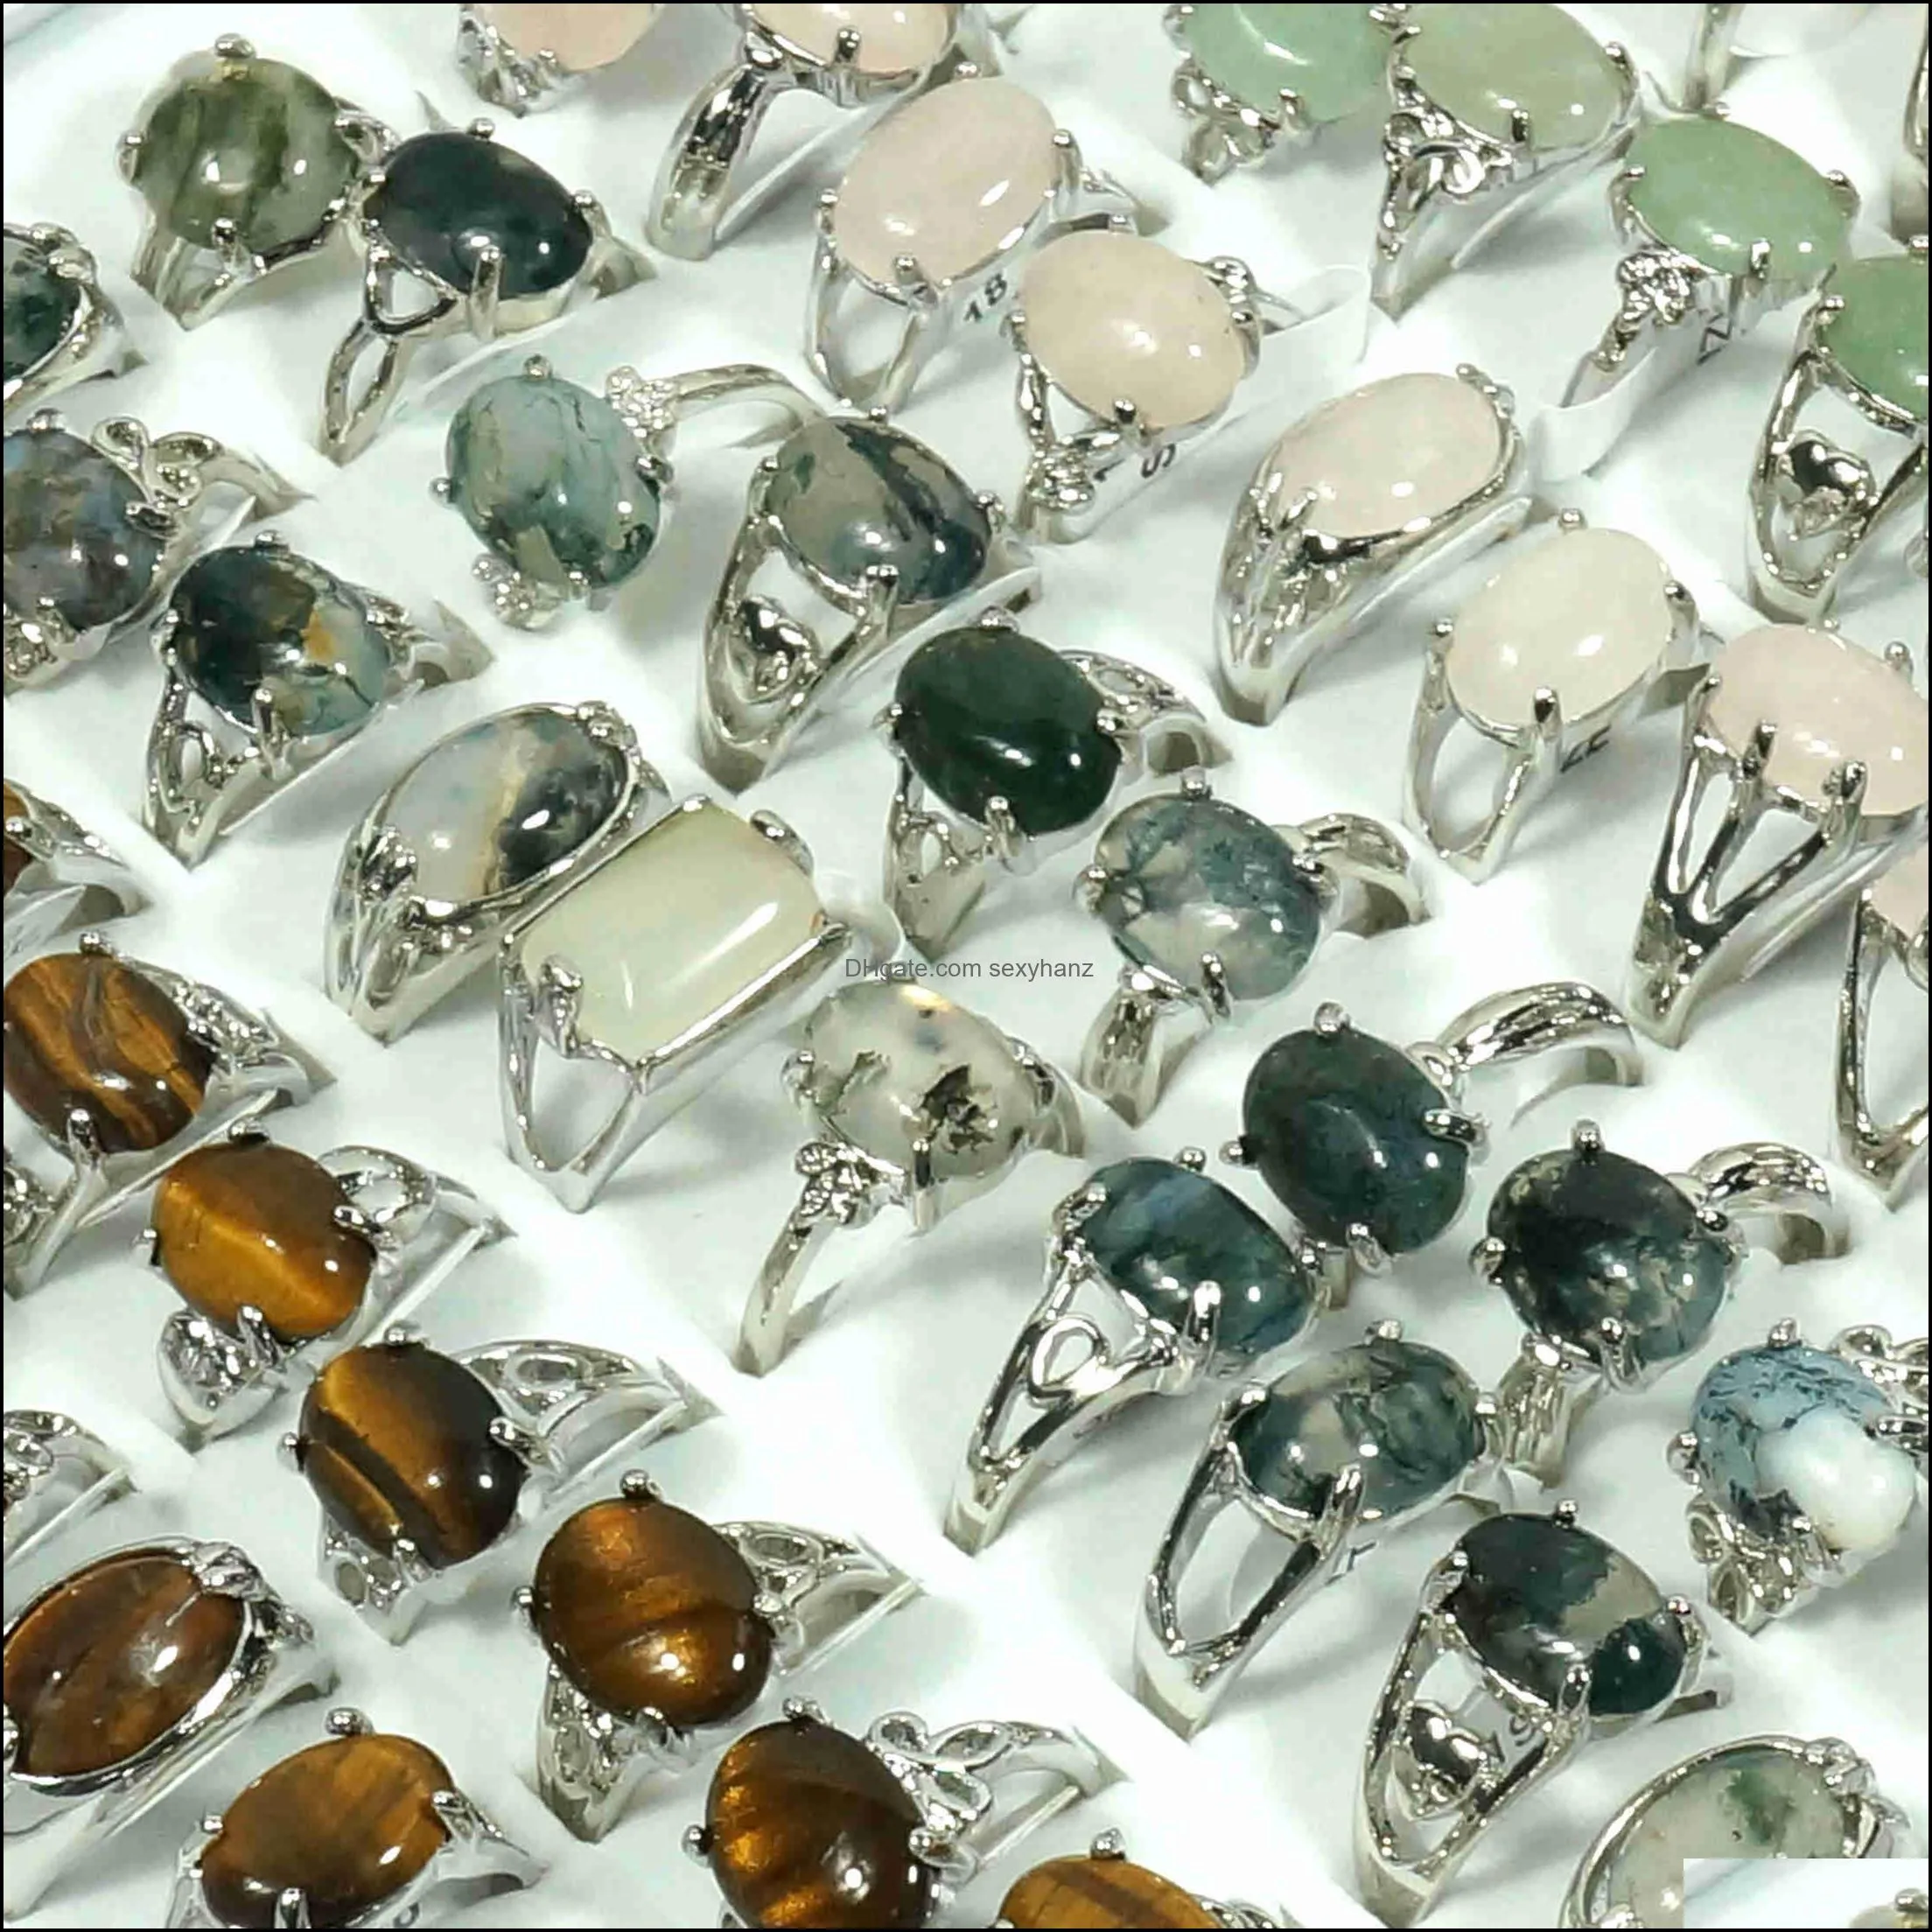 100 Pieces Box Mix Crystal Rings Bulk Wholesale Stone Healing Jewelry For Women Tiger Eye Moss Agate Rose Quartz Aventurine Red Grey